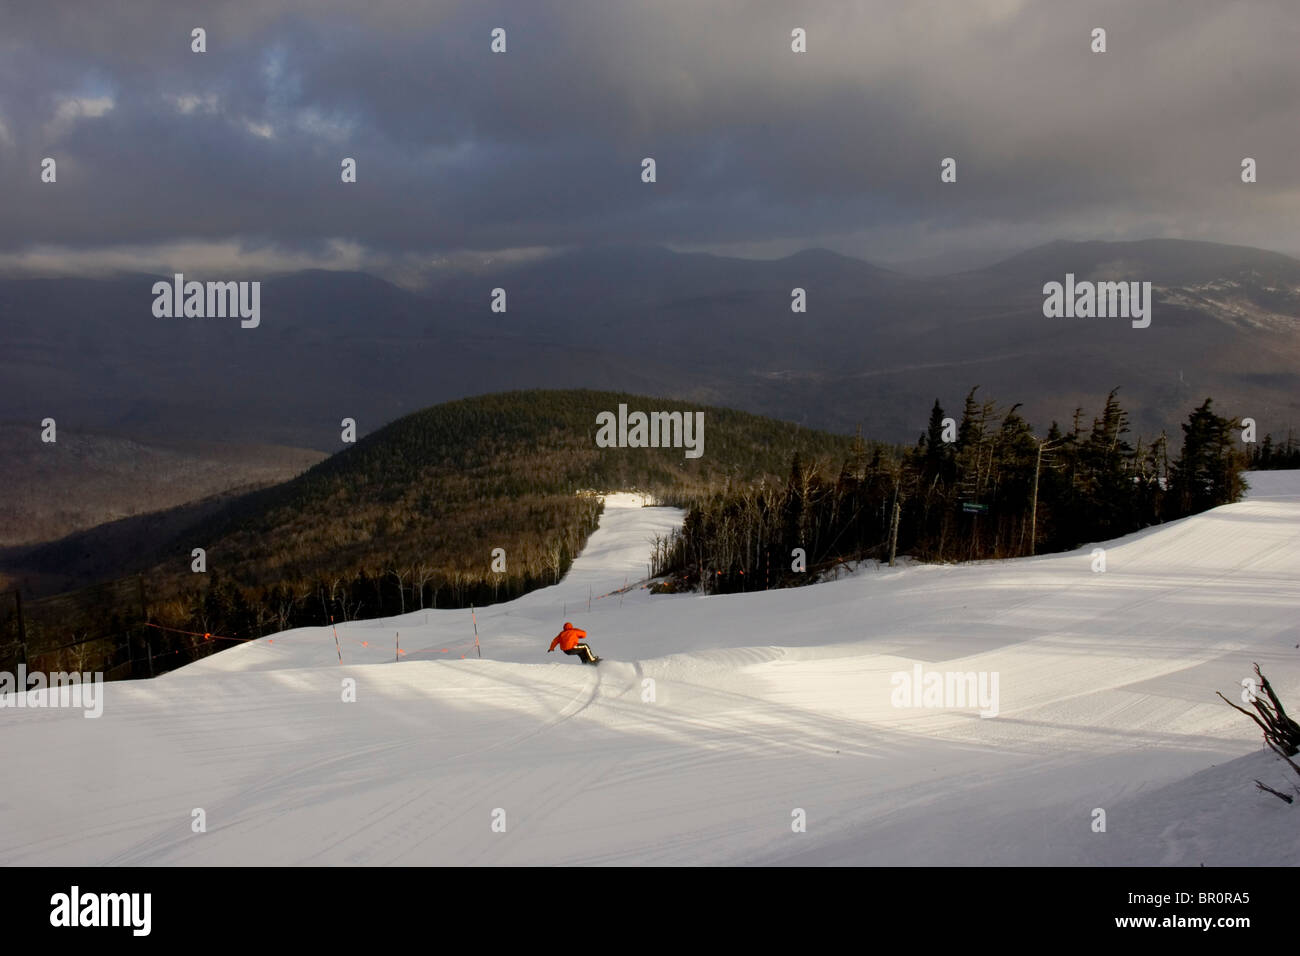 Snowboarding at Sunday River in Bethel, Maine. Stock Photo